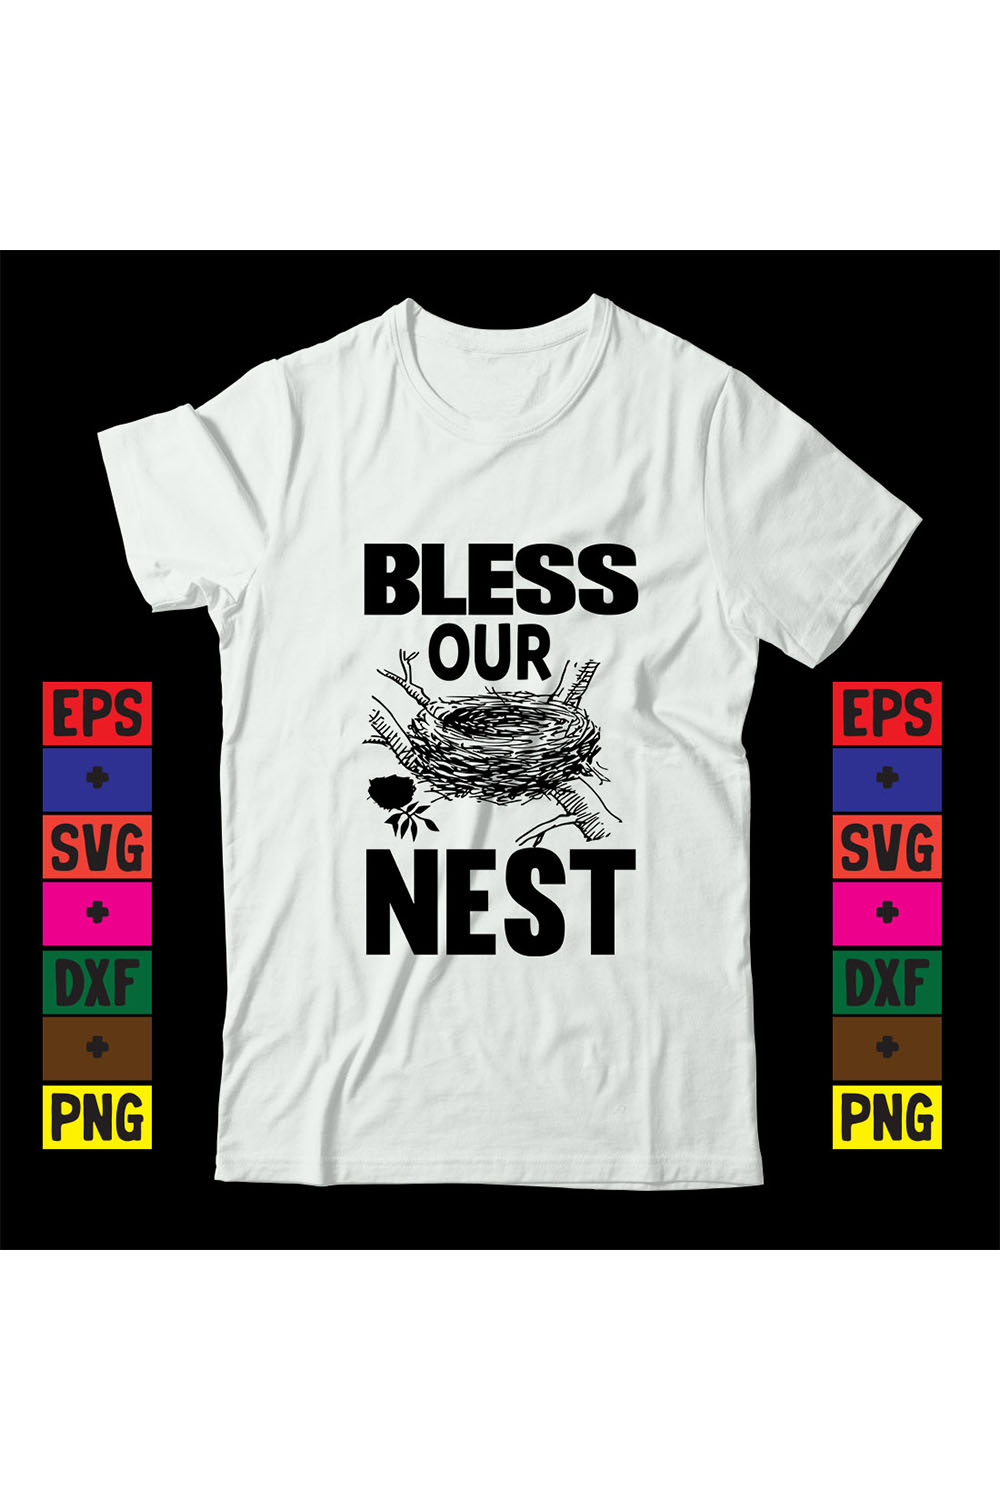 Bless our nest pinterest preview image.